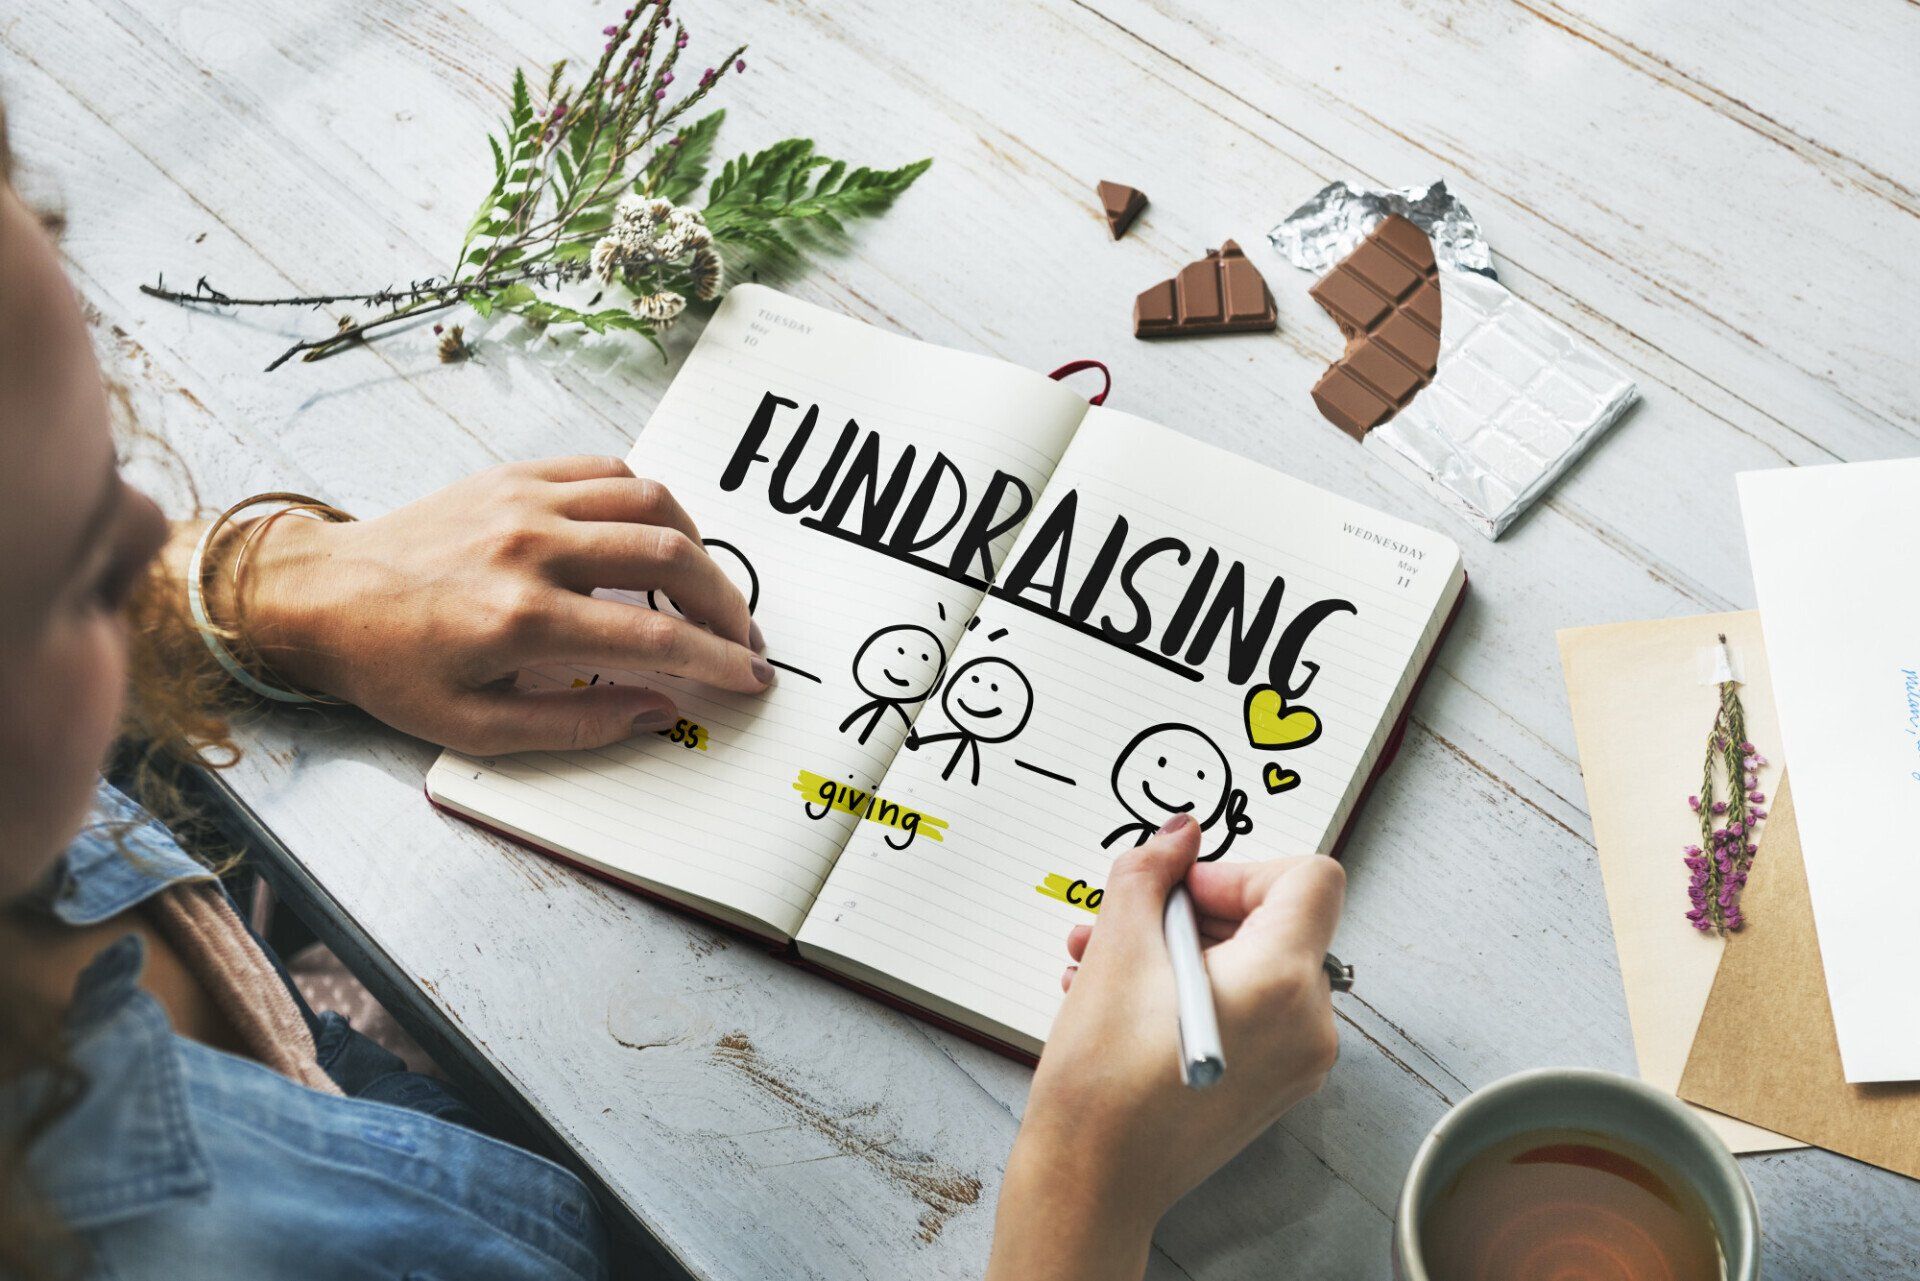 A girl is illustrating on a notebook the definition of fundraising